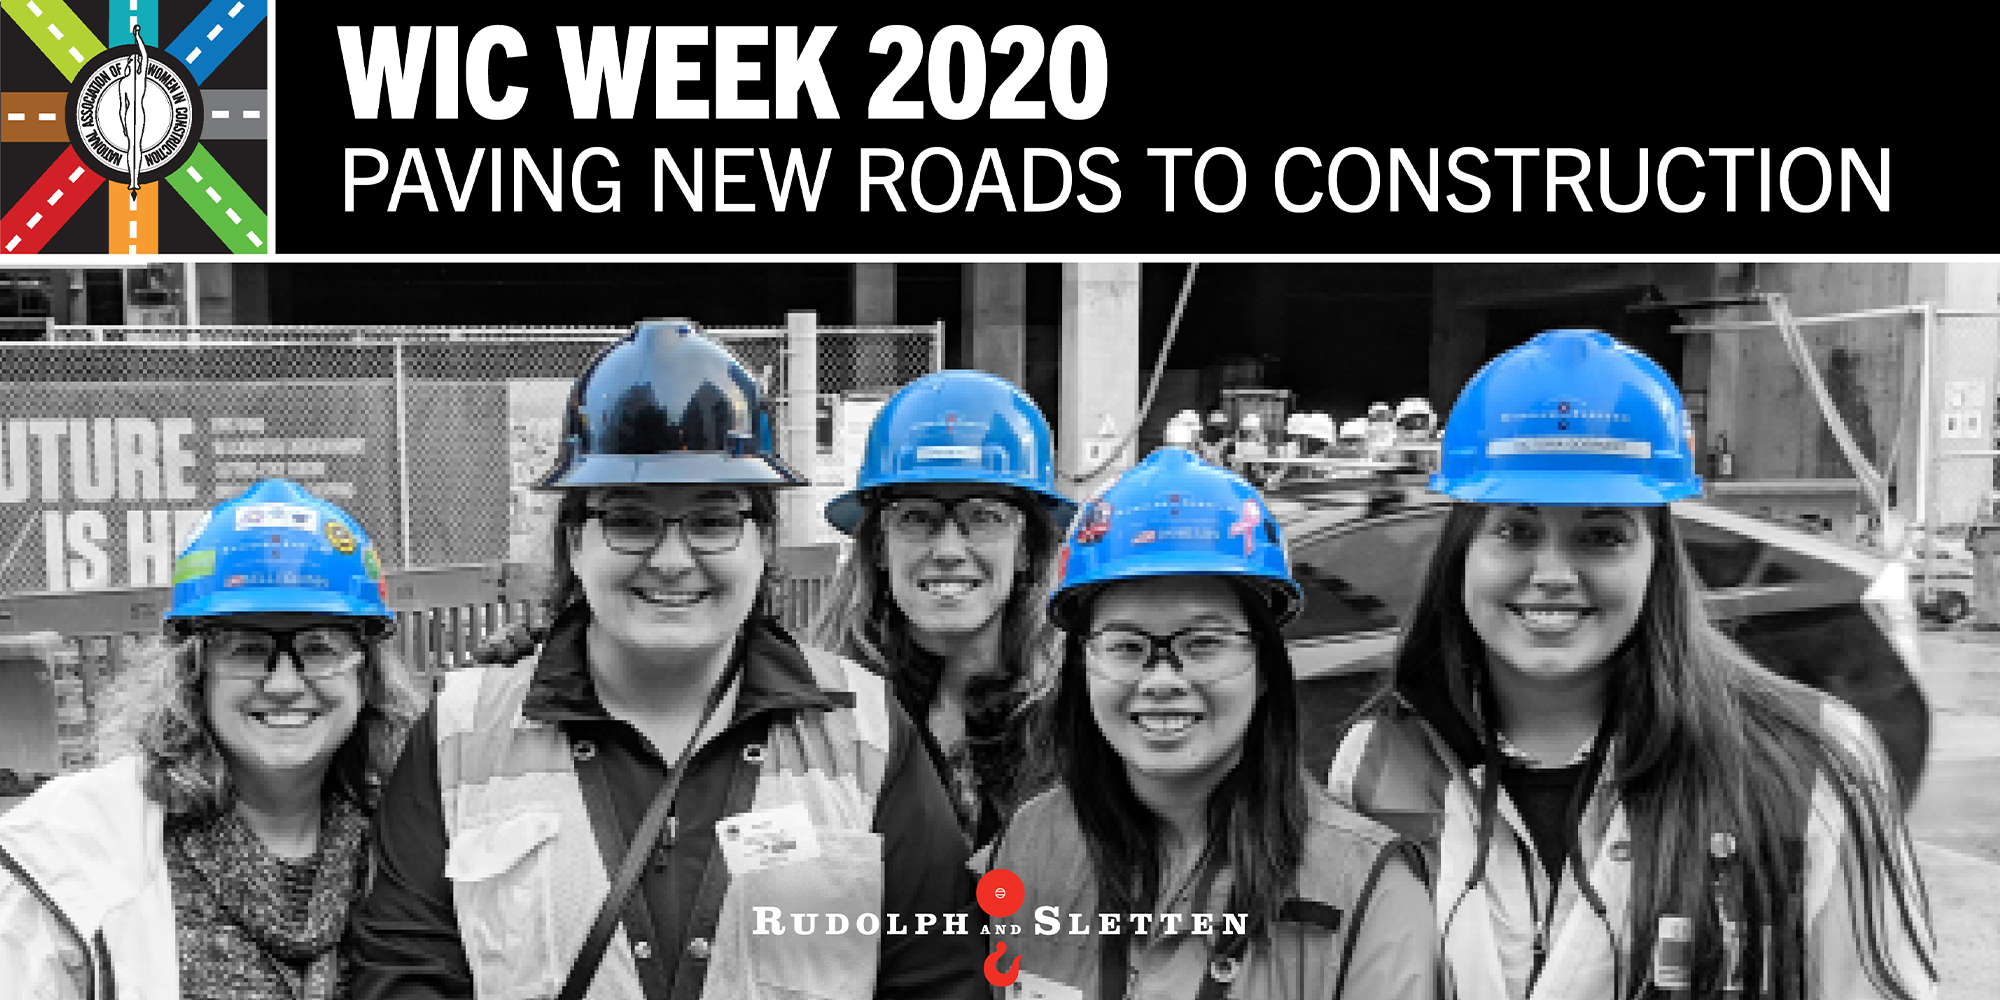 Women in Construction - Paving New Roads to Construction